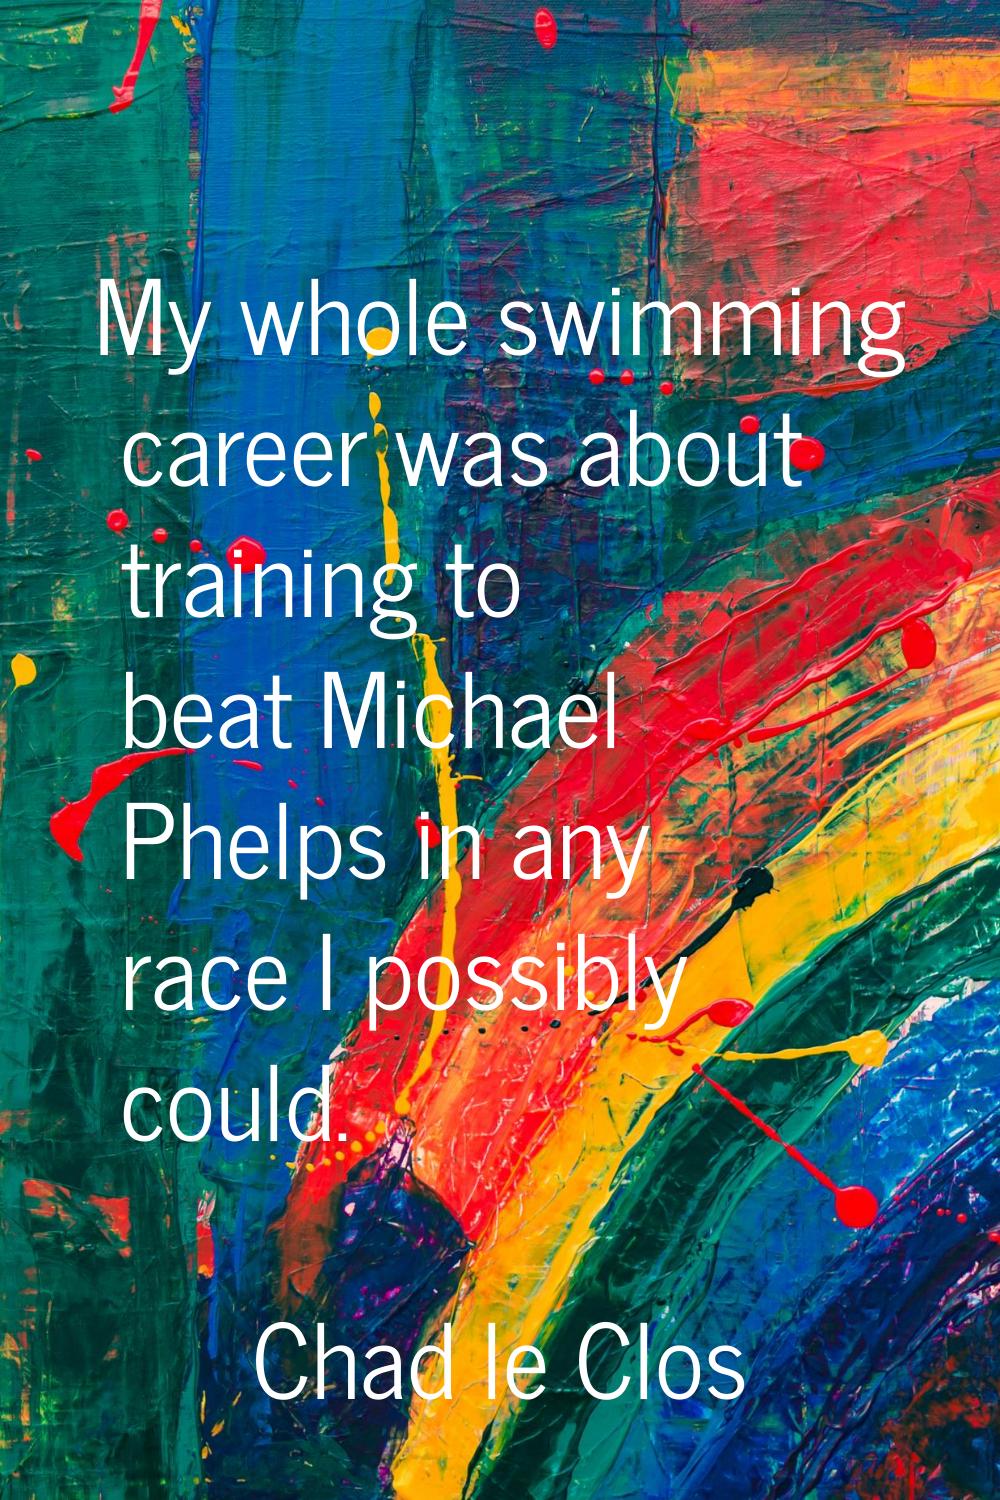 My whole swimming career was about training to beat Michael Phelps in any race I possibly could.